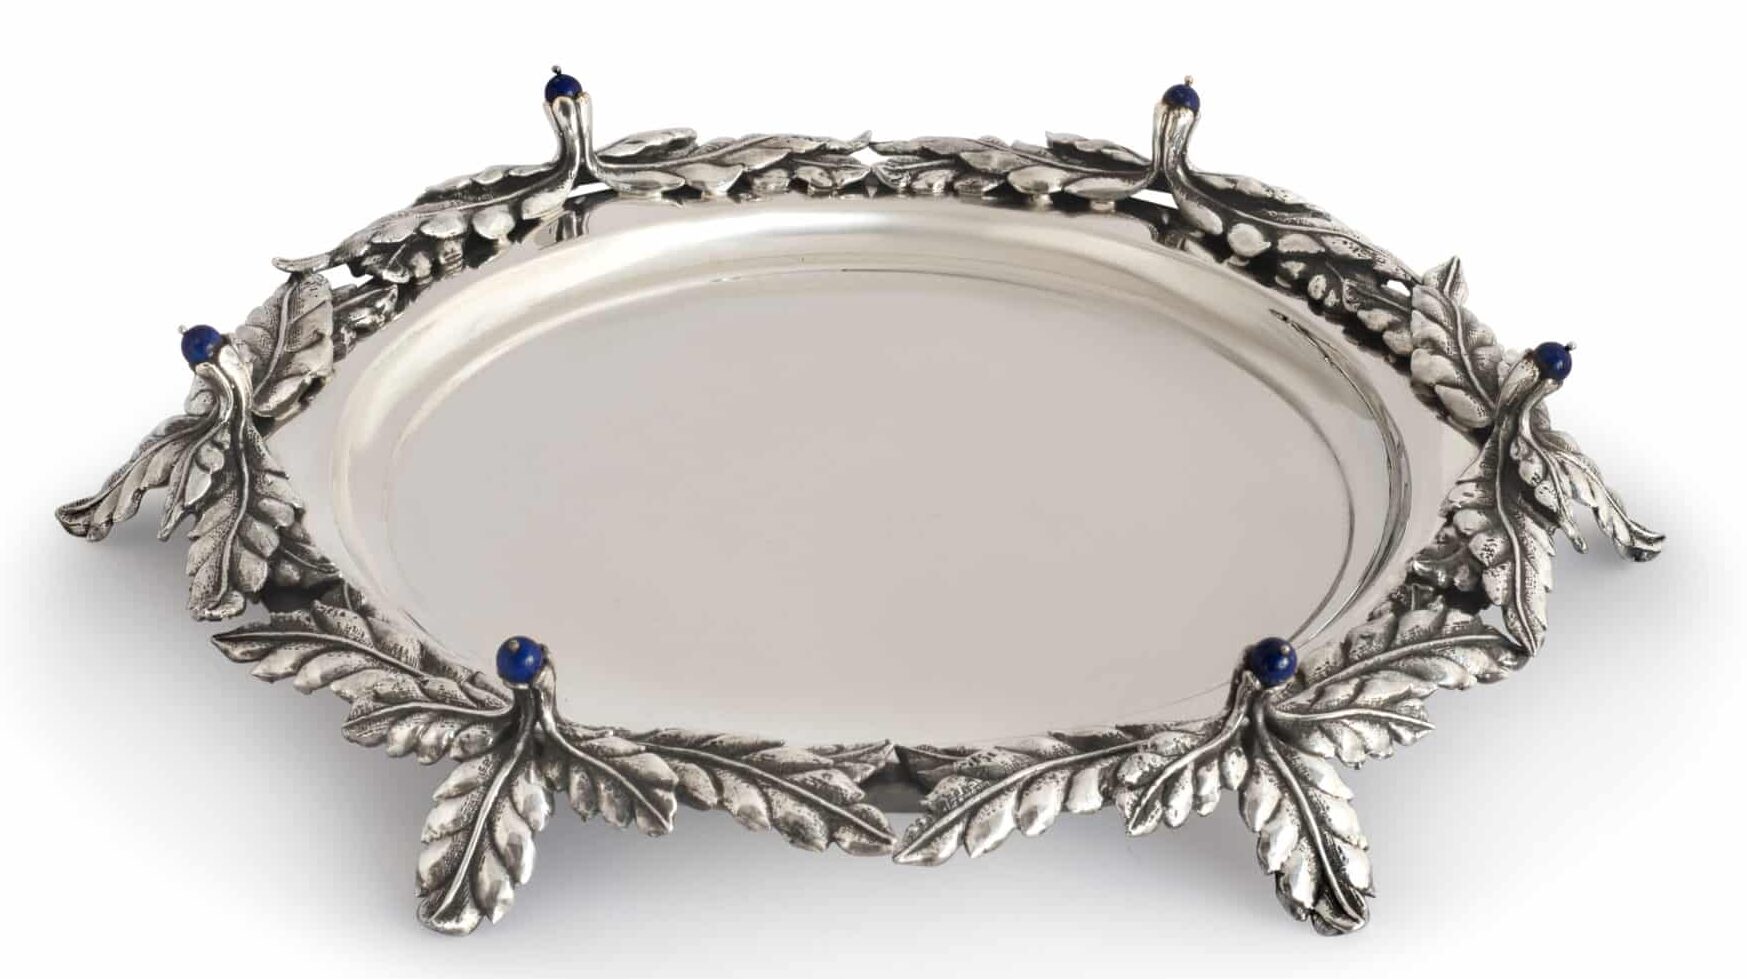 Special Leaf Design Candlesticks Tray with Blue Stones